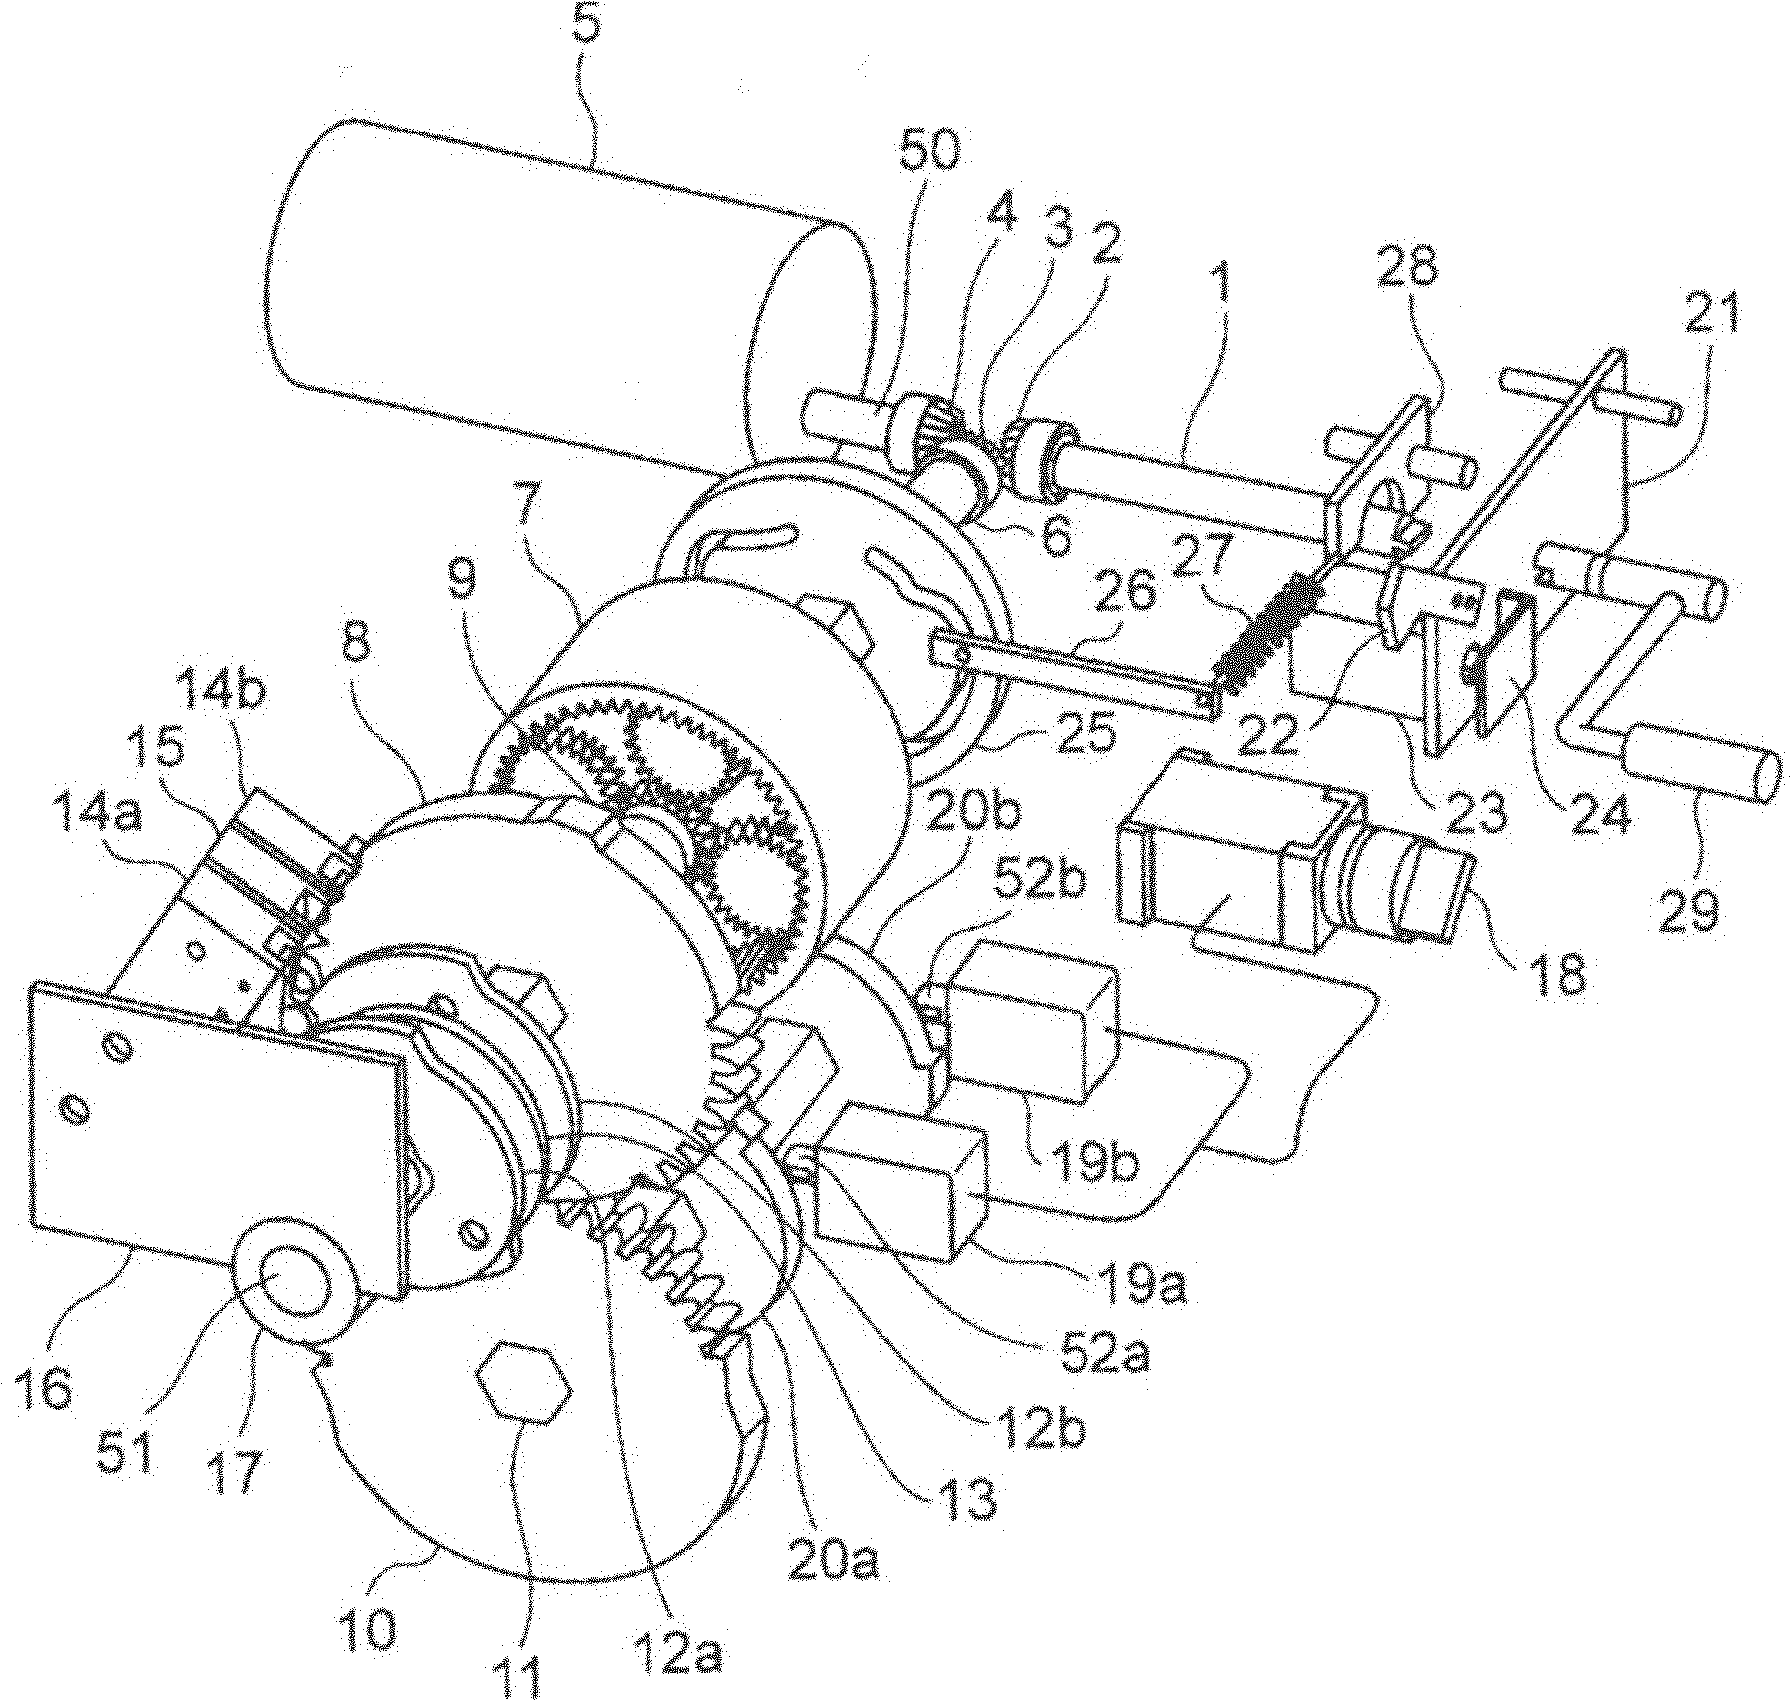 Switch operating device